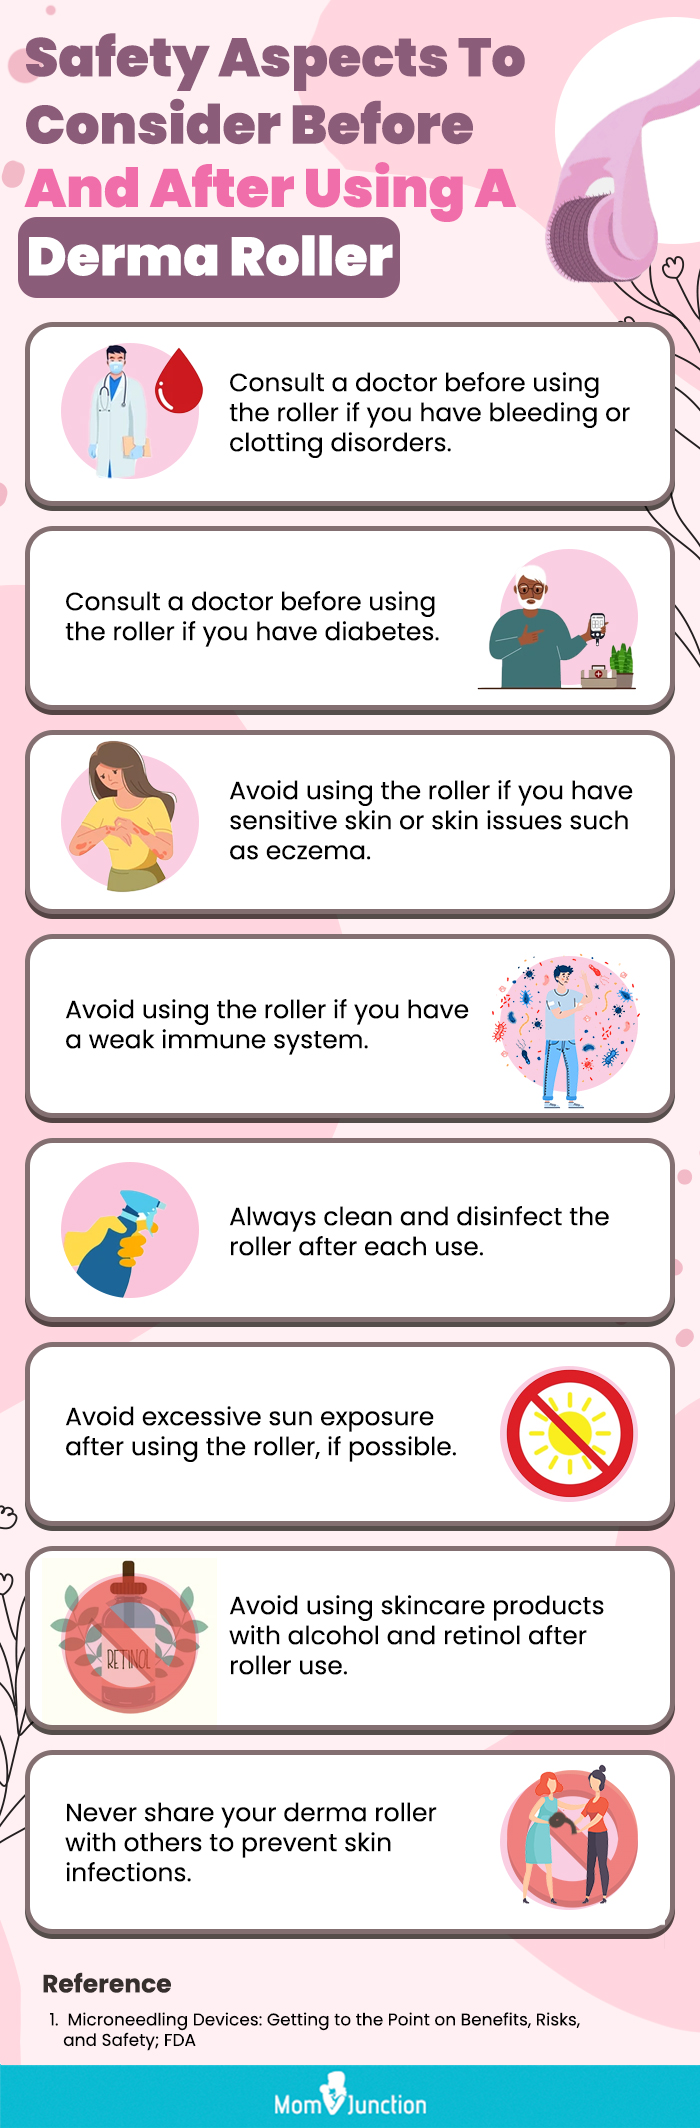 Safety Aspects To Consider Before And After Using A Derma Roller (infographic)